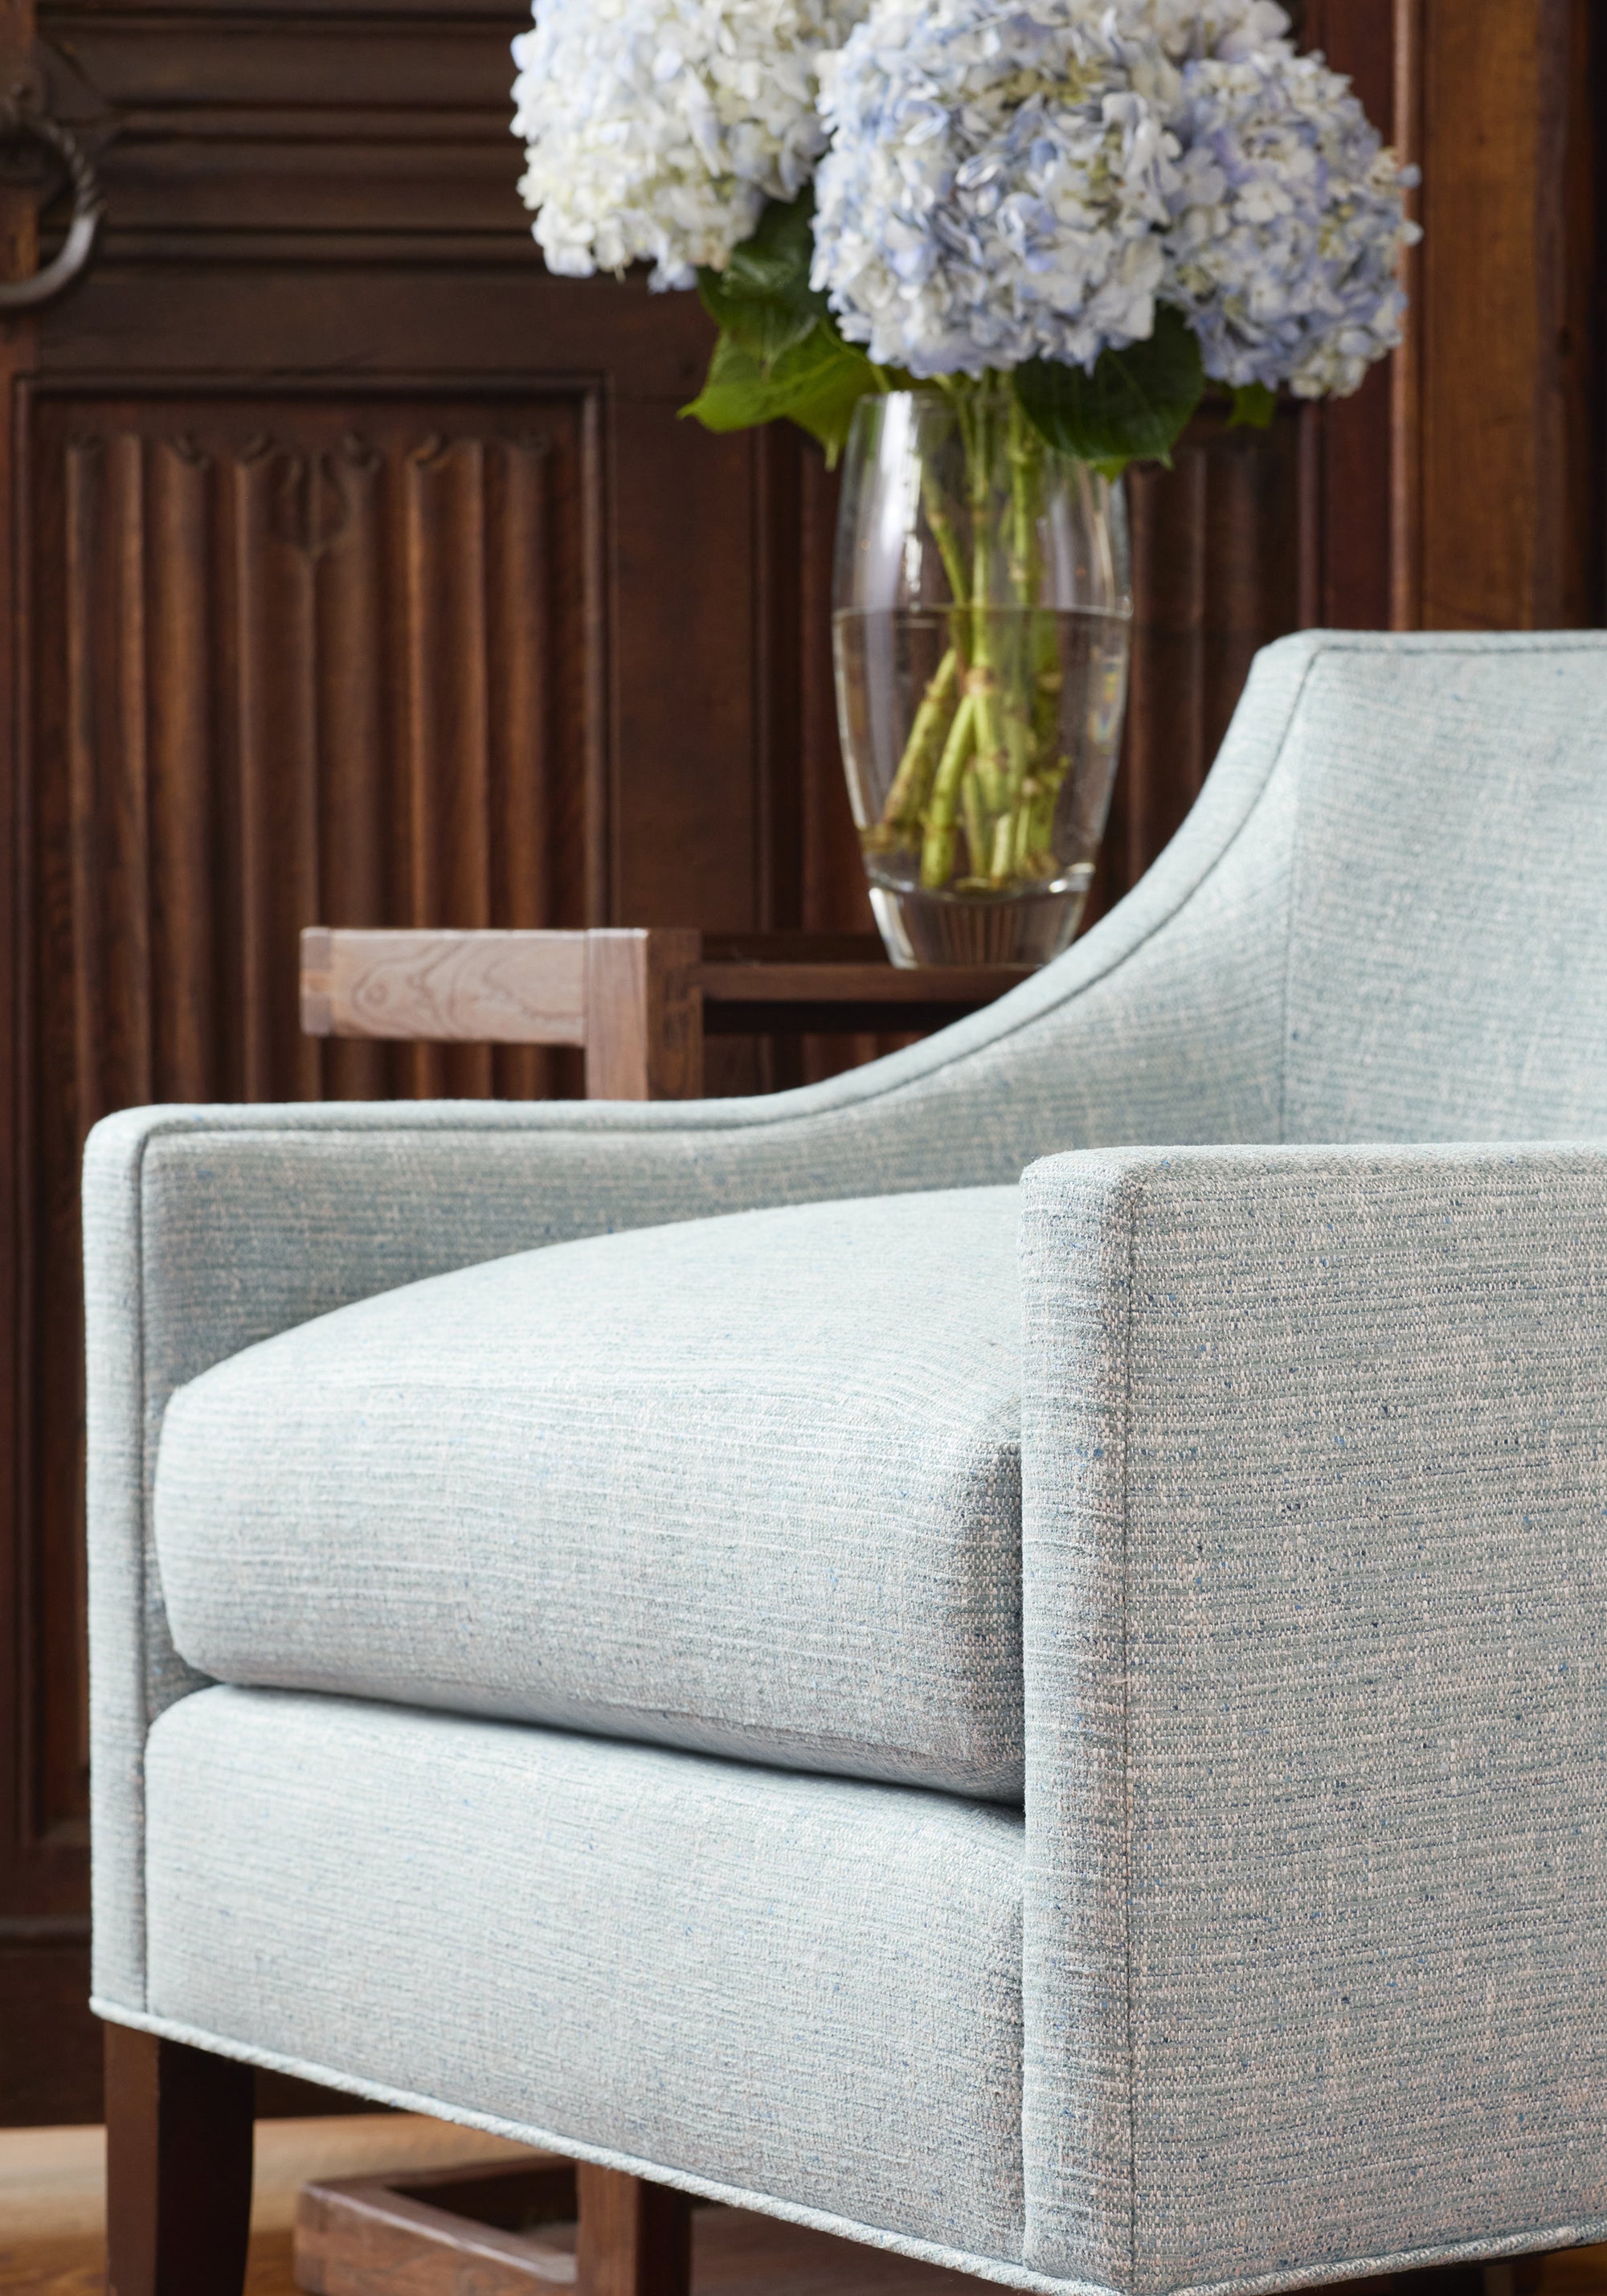 Chair upholstered in Elgin fabric in seaglass color - pattern number W80939 - by Thibaut fabrics